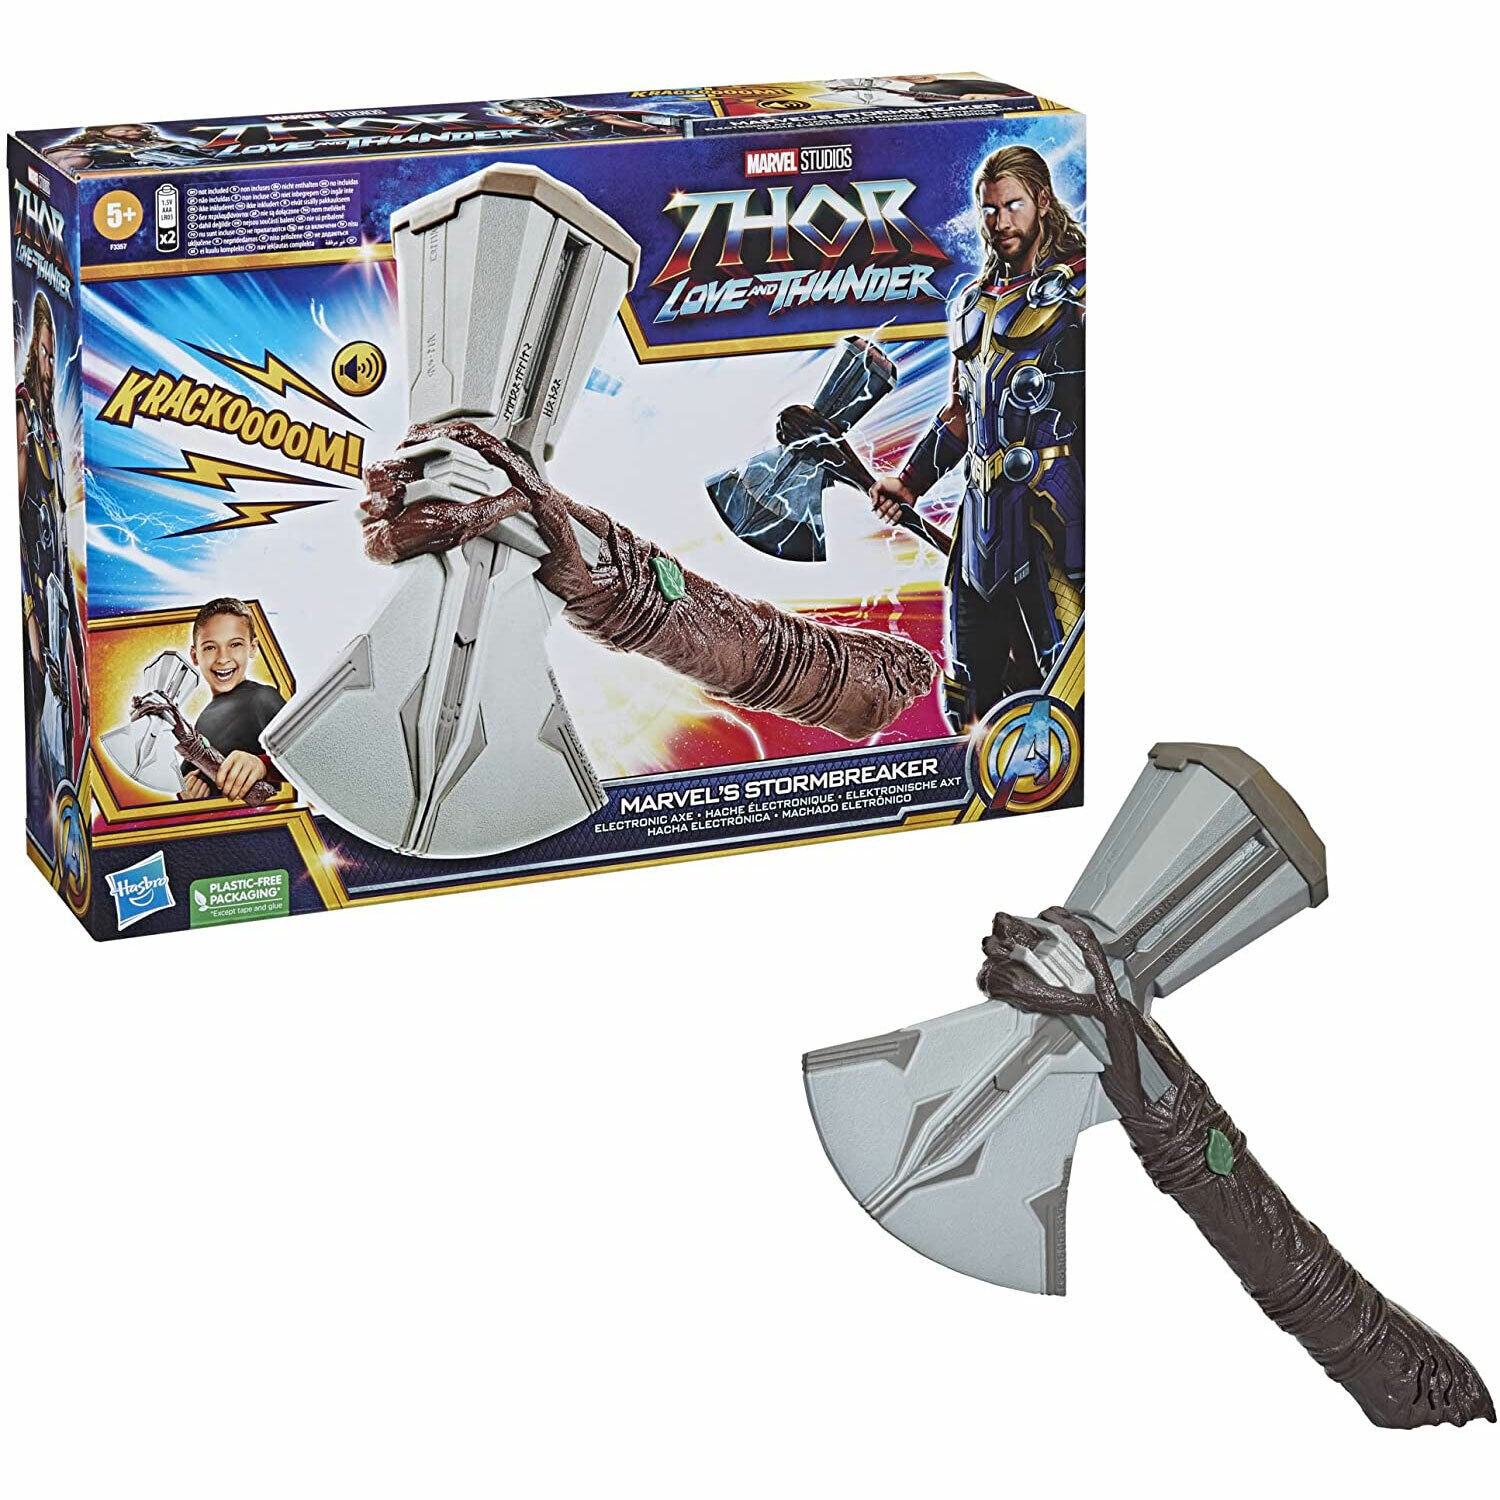 Marvel's Stormbreaker Electronic Axe - Thor Love and Thunder - Authentic Replica